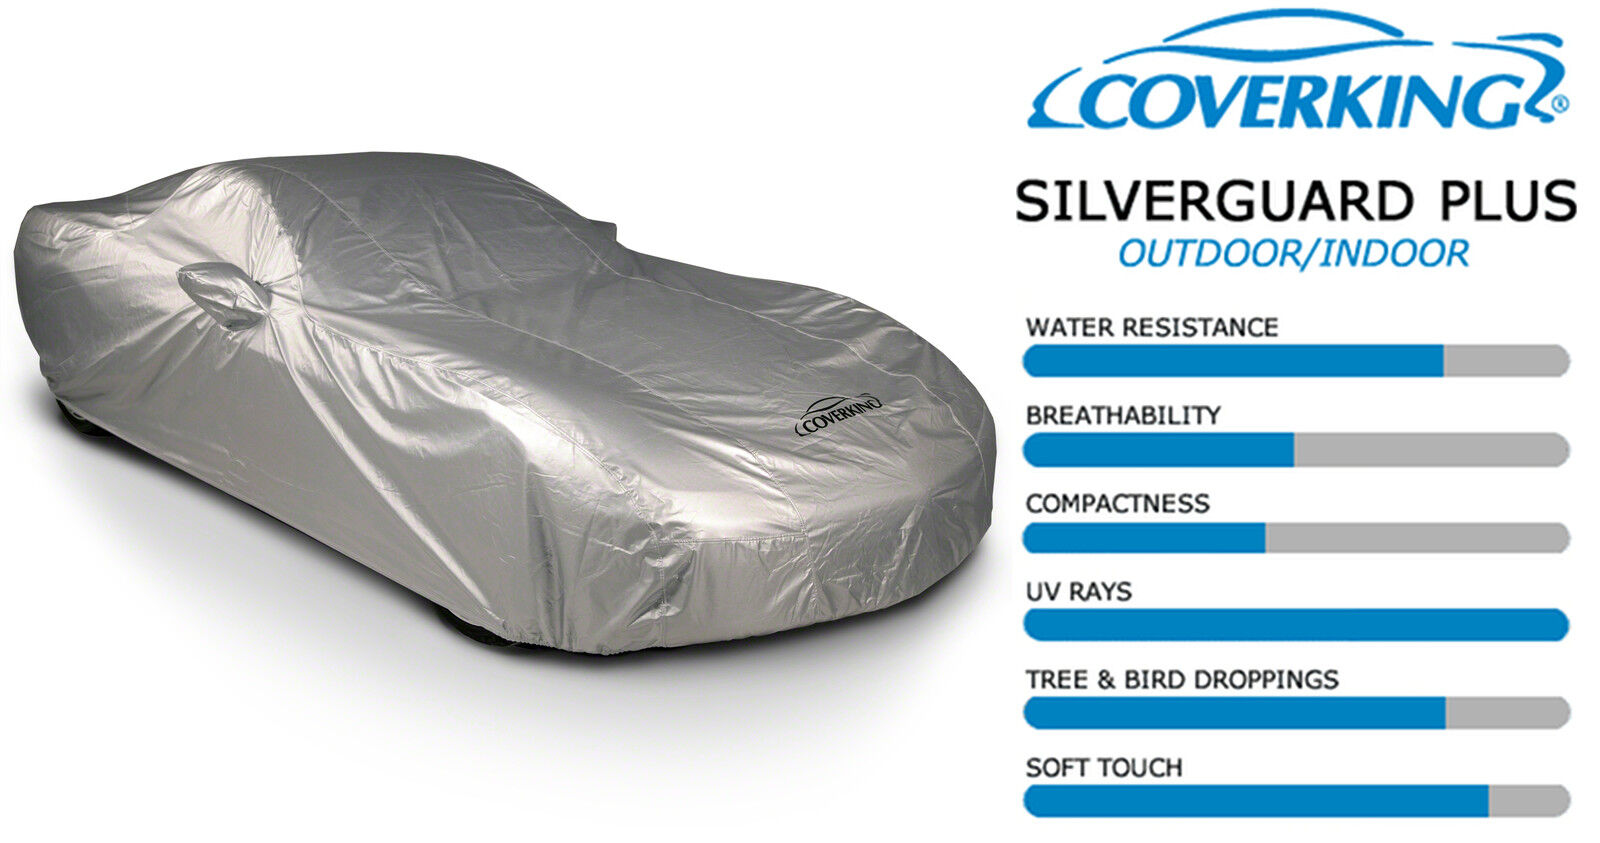 COVERKING Silverguard Plus CAR COVER for 2015 to 2019 Challenger SRT & Scat Pack